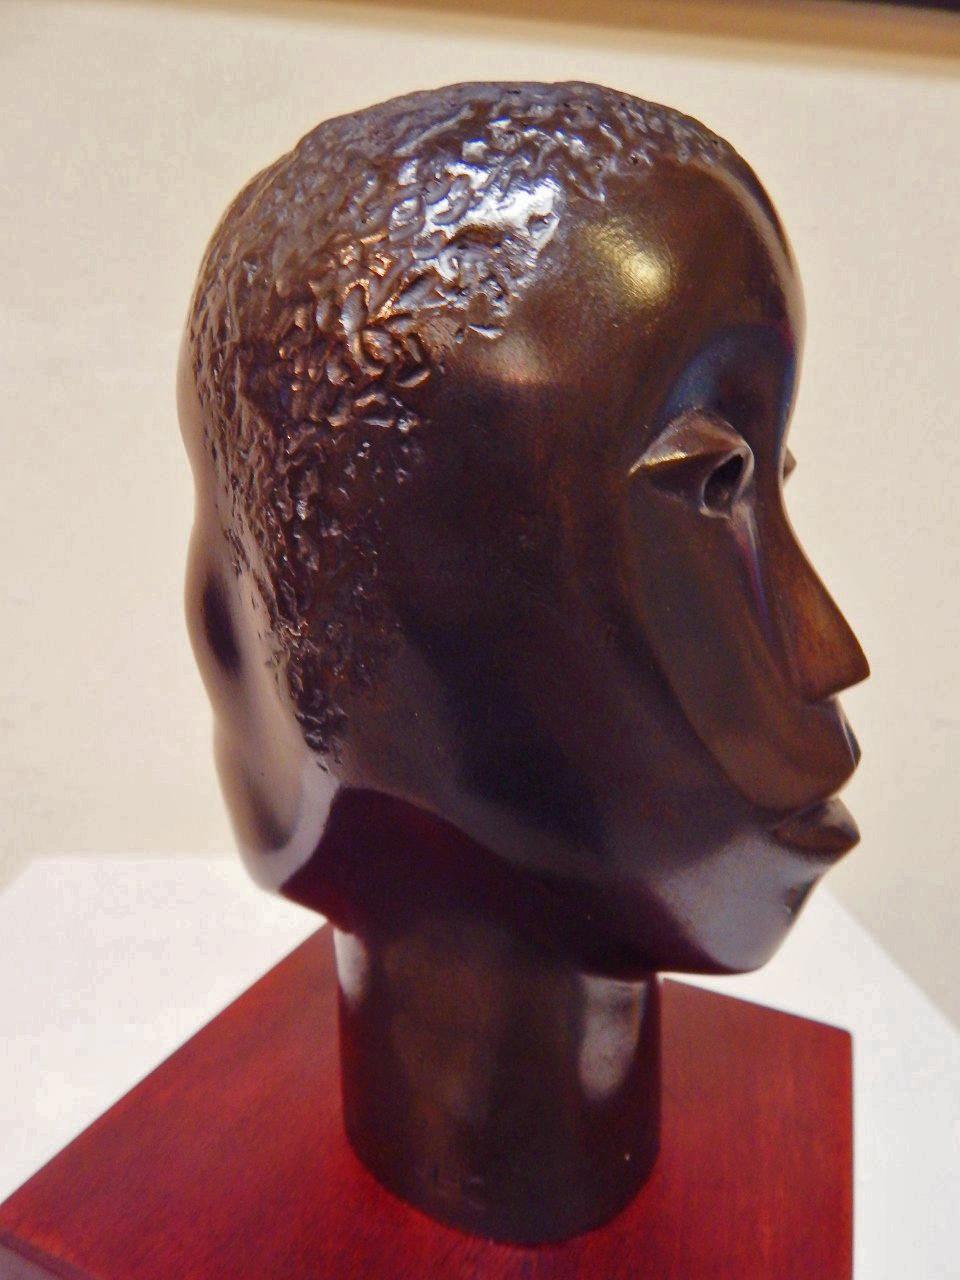 Faces for Two Worlds - Sculpture by Elizabeth Catlett